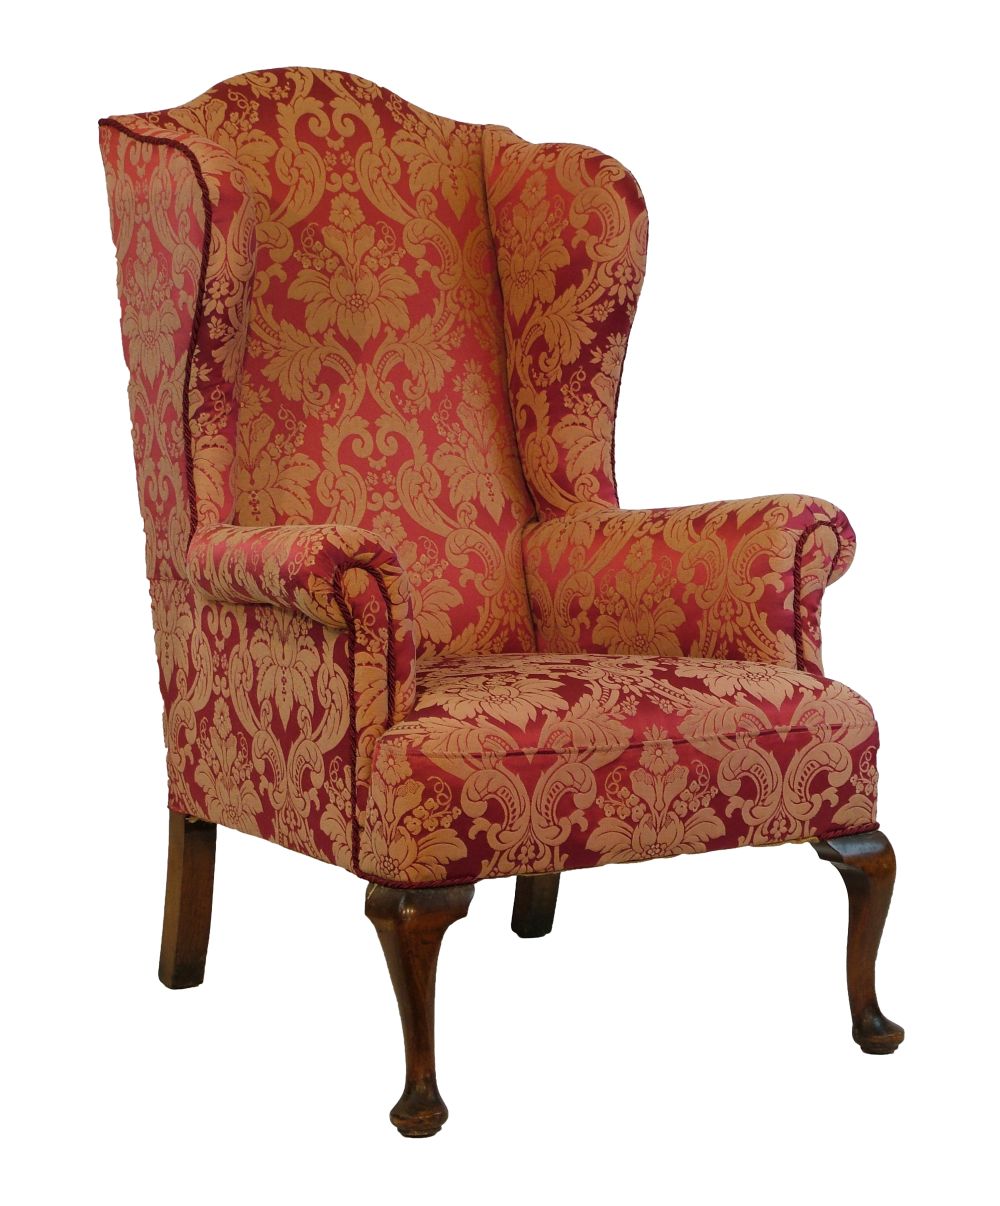 Early 20th Century Georgian style wing back drawing room chair upholstered in red and off-white